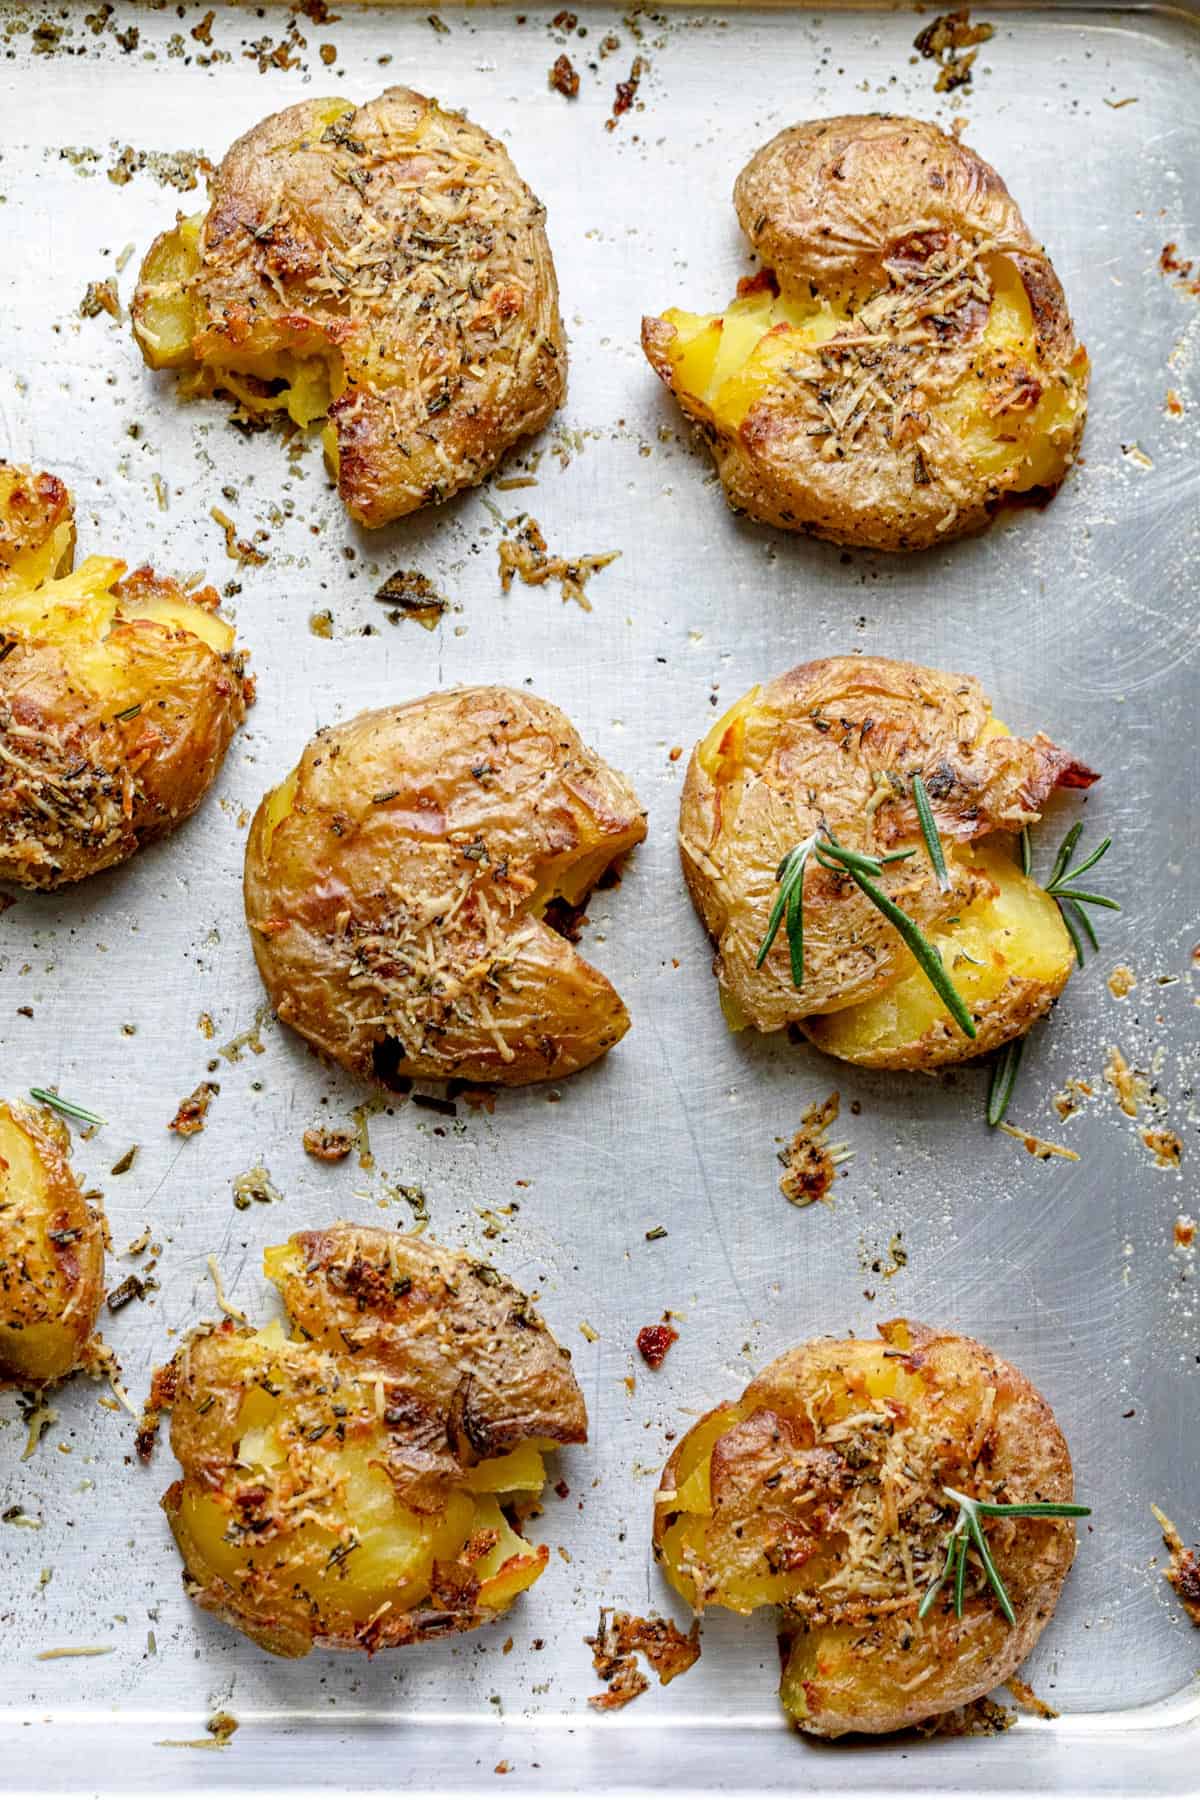 These Rosemary Garlic Smashed Potatoes are a best of both worlds potato recipe - mashed and roasted! They are soft on the inside, crispy on the outside and bursting with rosemary garlicky flavor. It's a creative healthy side-dish the whole family will love!